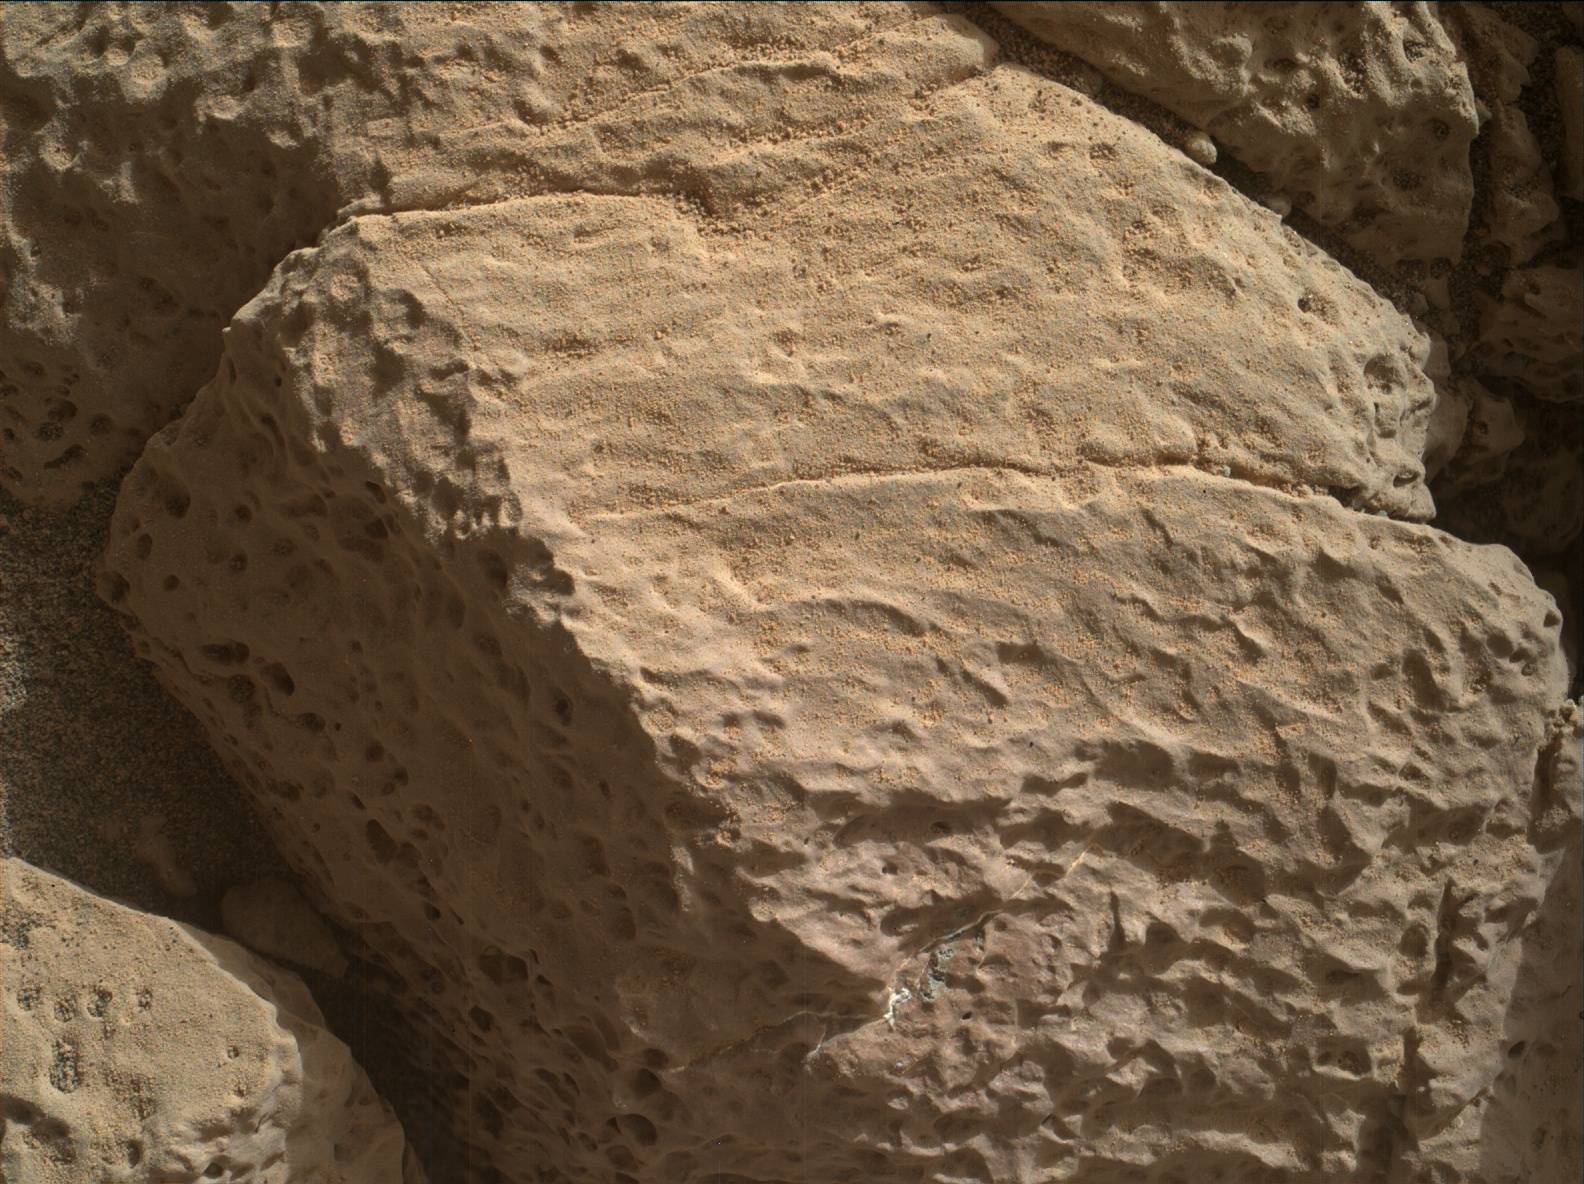 Nasa's Mars rover Curiosity acquired this image using its Mars Hand Lens Imager (MAHLI) on Sol 1404